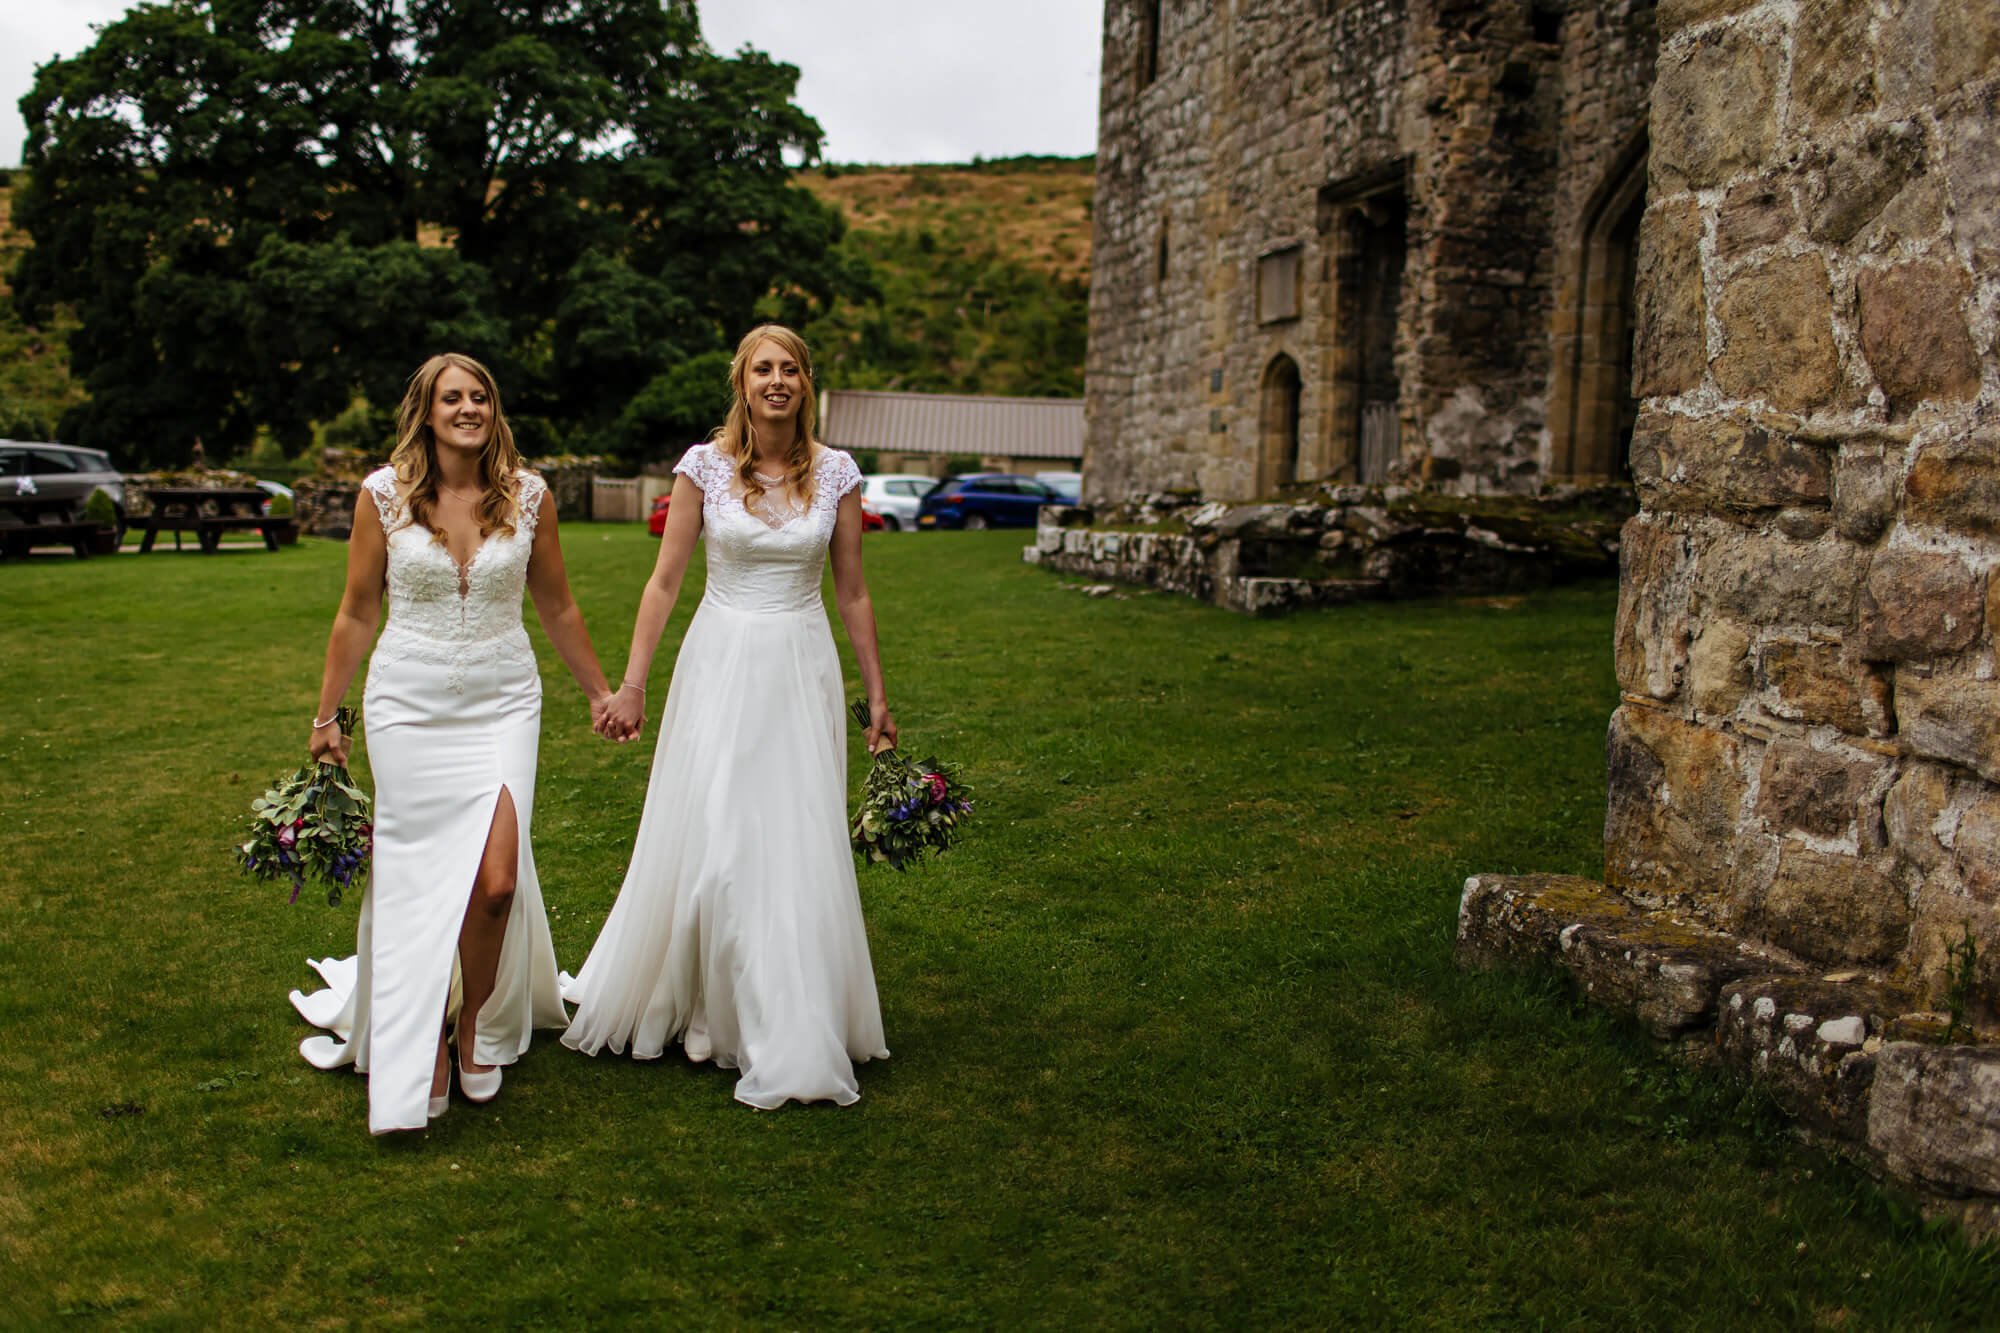 Two brides on their wedding day in Yorkshire